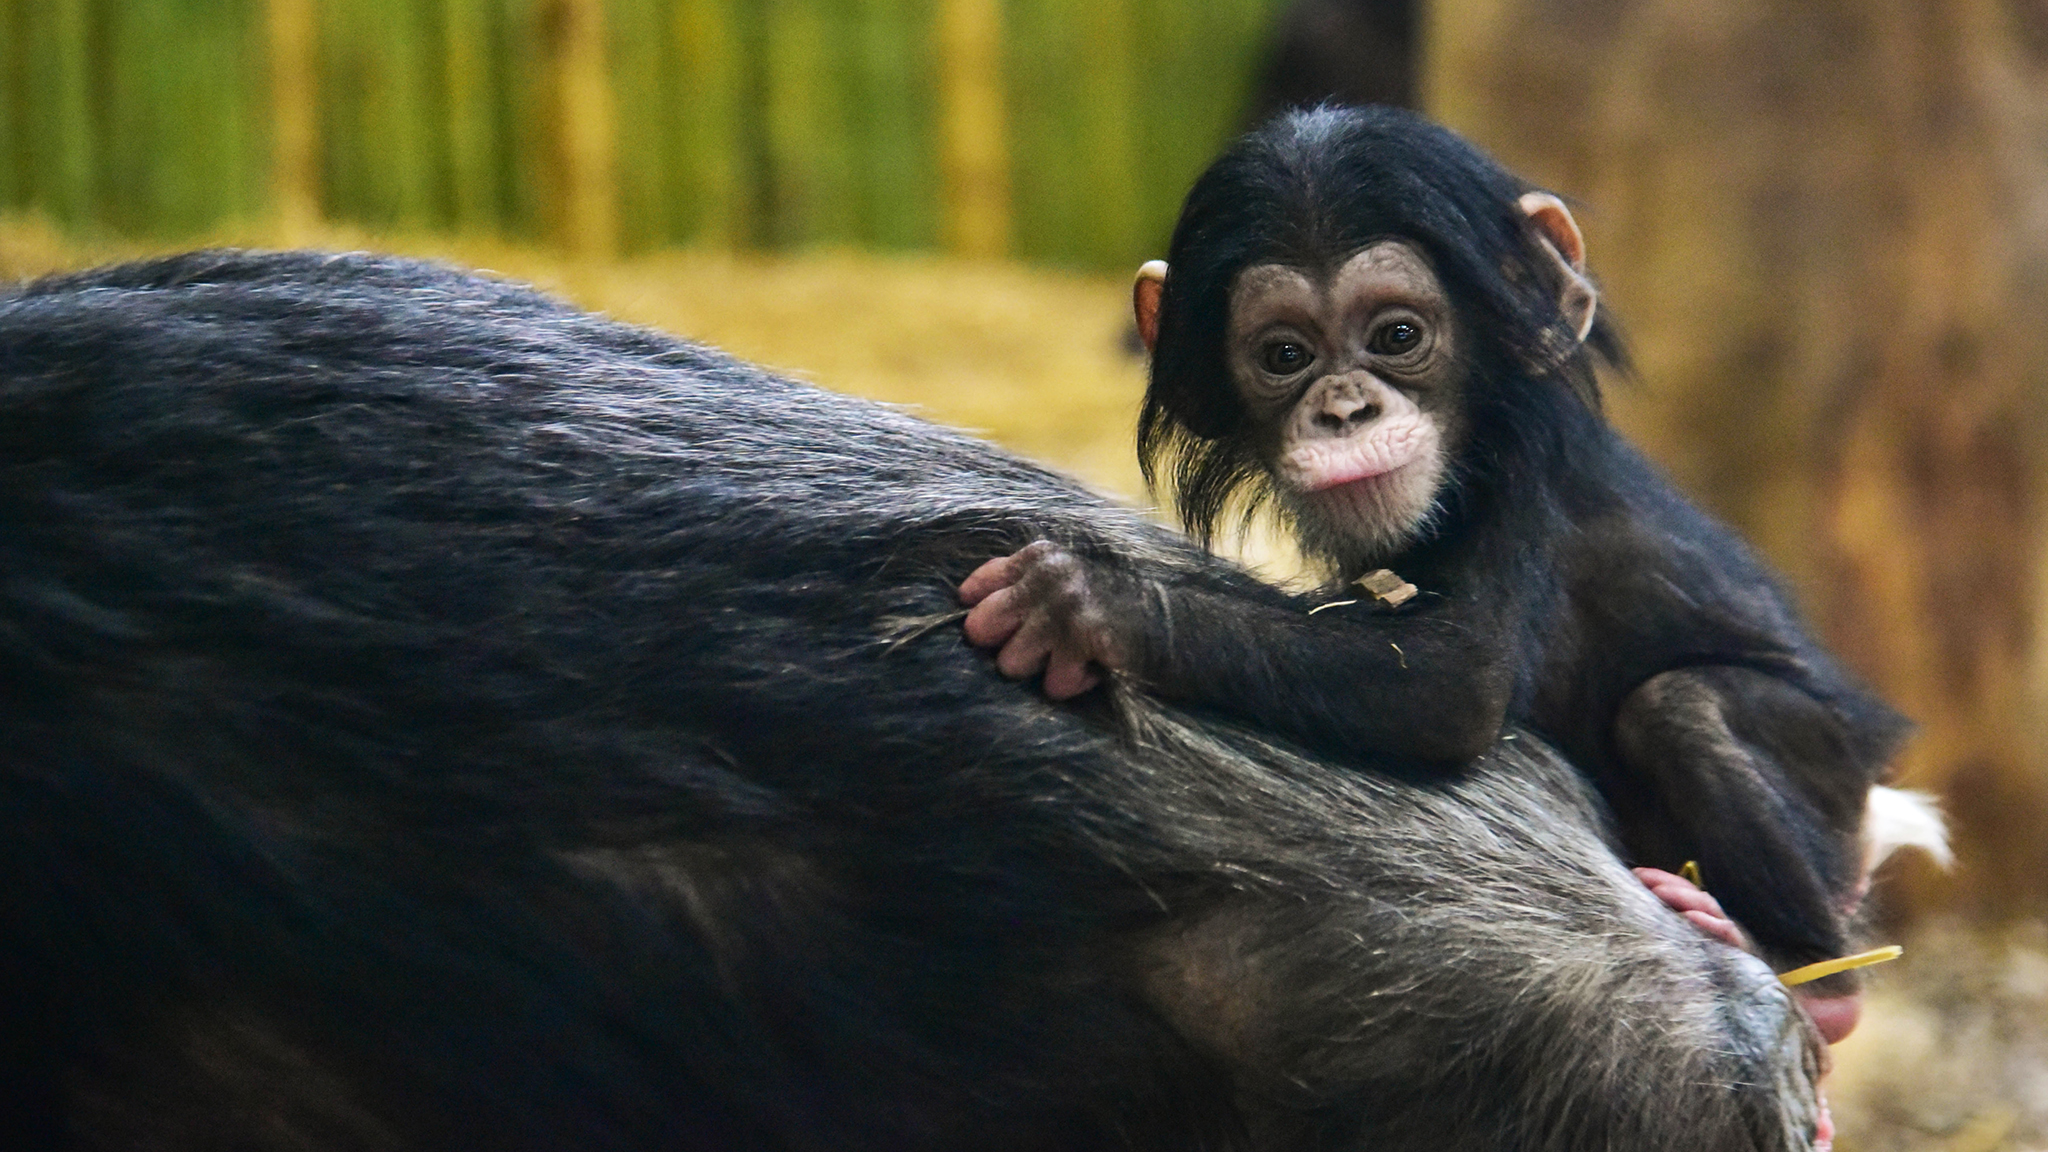 baby chimpanzee clinging to mother's back.